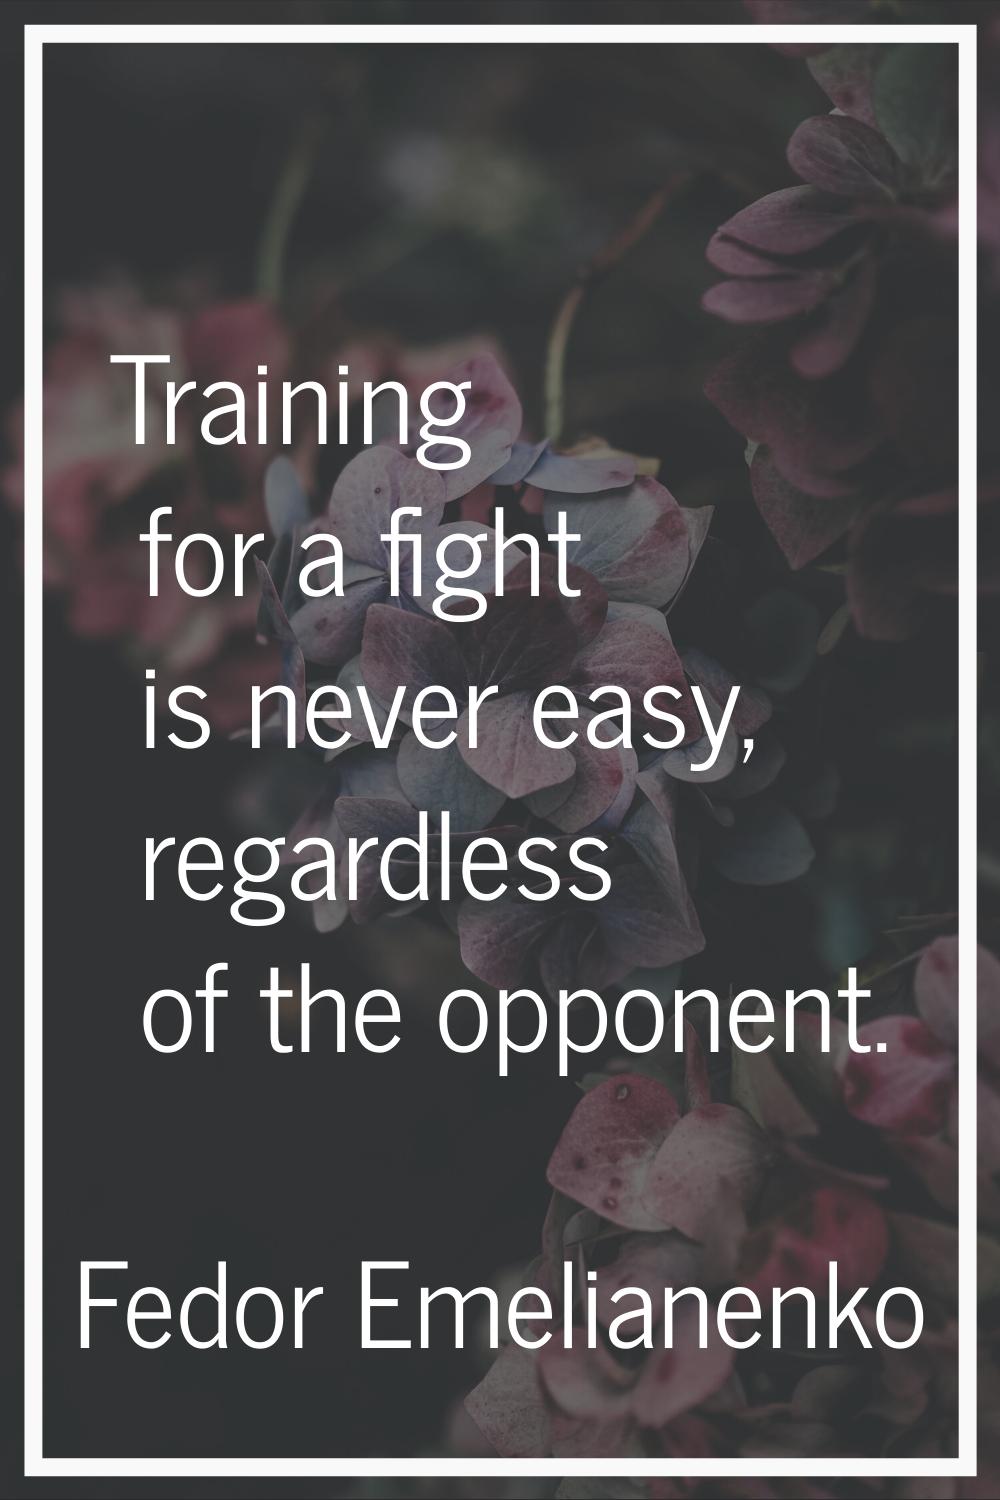 Training for a fight is never easy, regardless of the opponent.